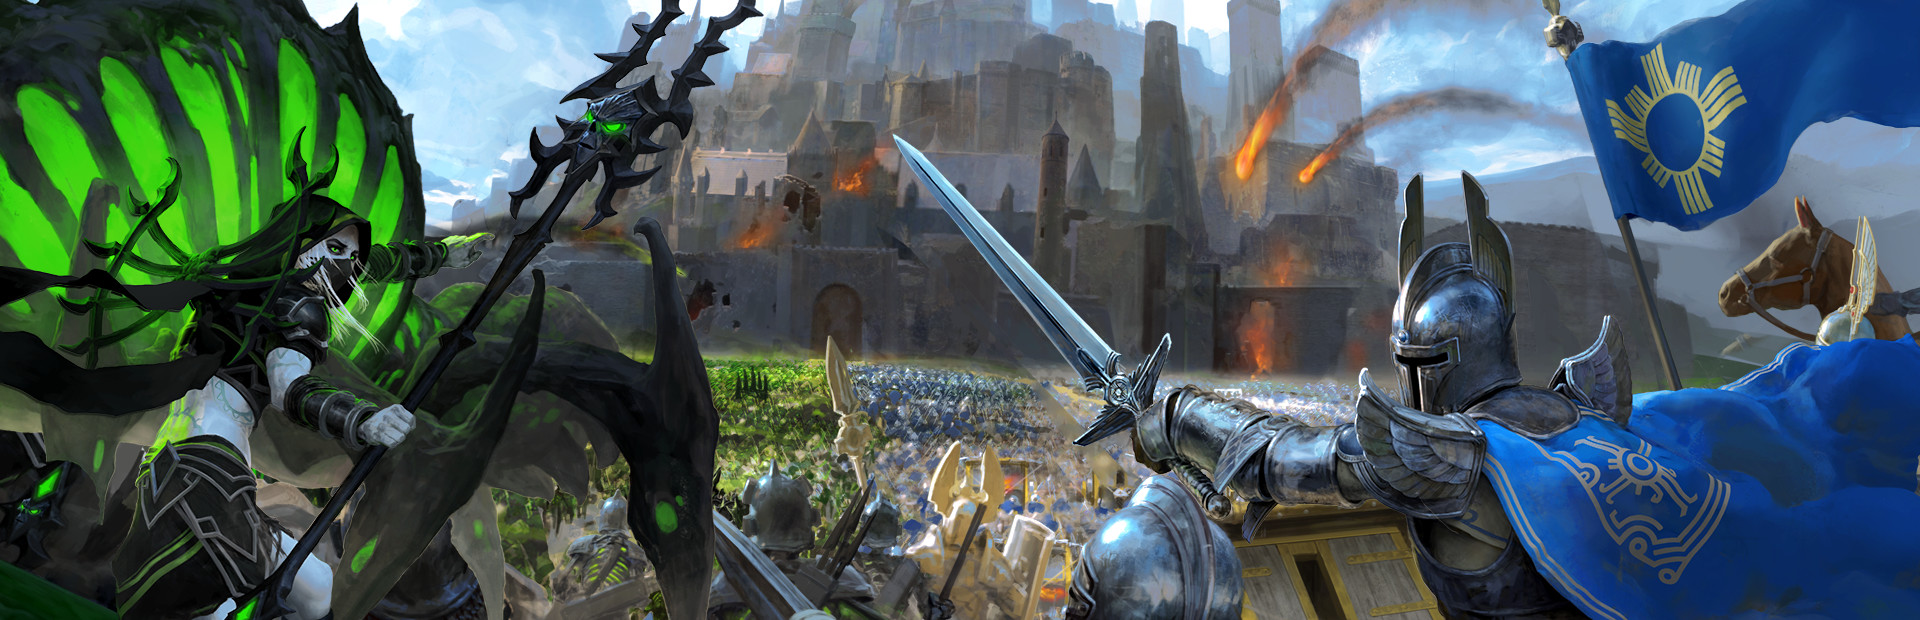 Might & Magic Heroes Online cover image